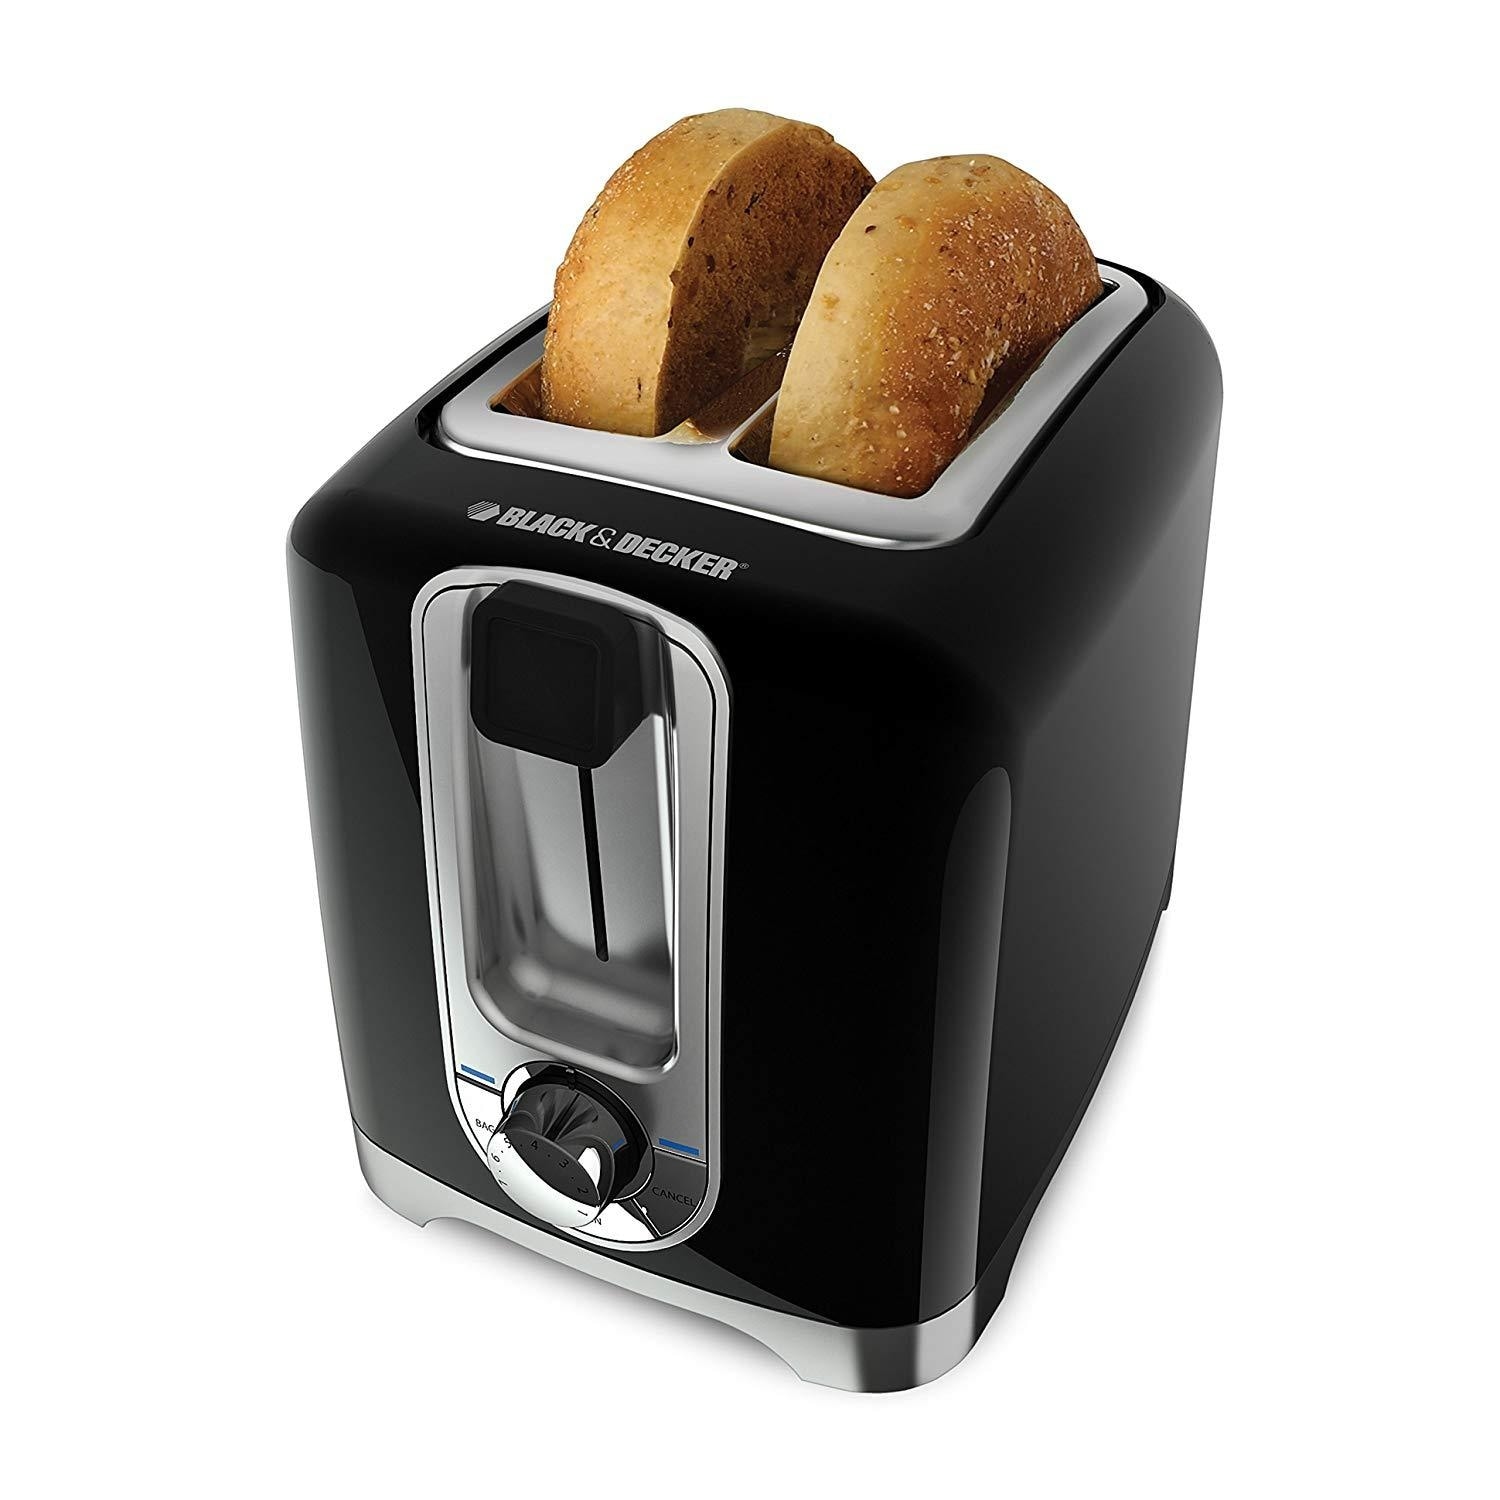 https://ak1.ostkcdn.com/images/products/is/images/direct/d4216215346ed47a4d1e392a81e3236494da749e/BLACK-%26-DECKER-2-Slice-Toaster%2C-Square%2C-Black%2C-with-Bagel-Function-and-Removable-Crumb-Tray%2C-TR1256B.jpg